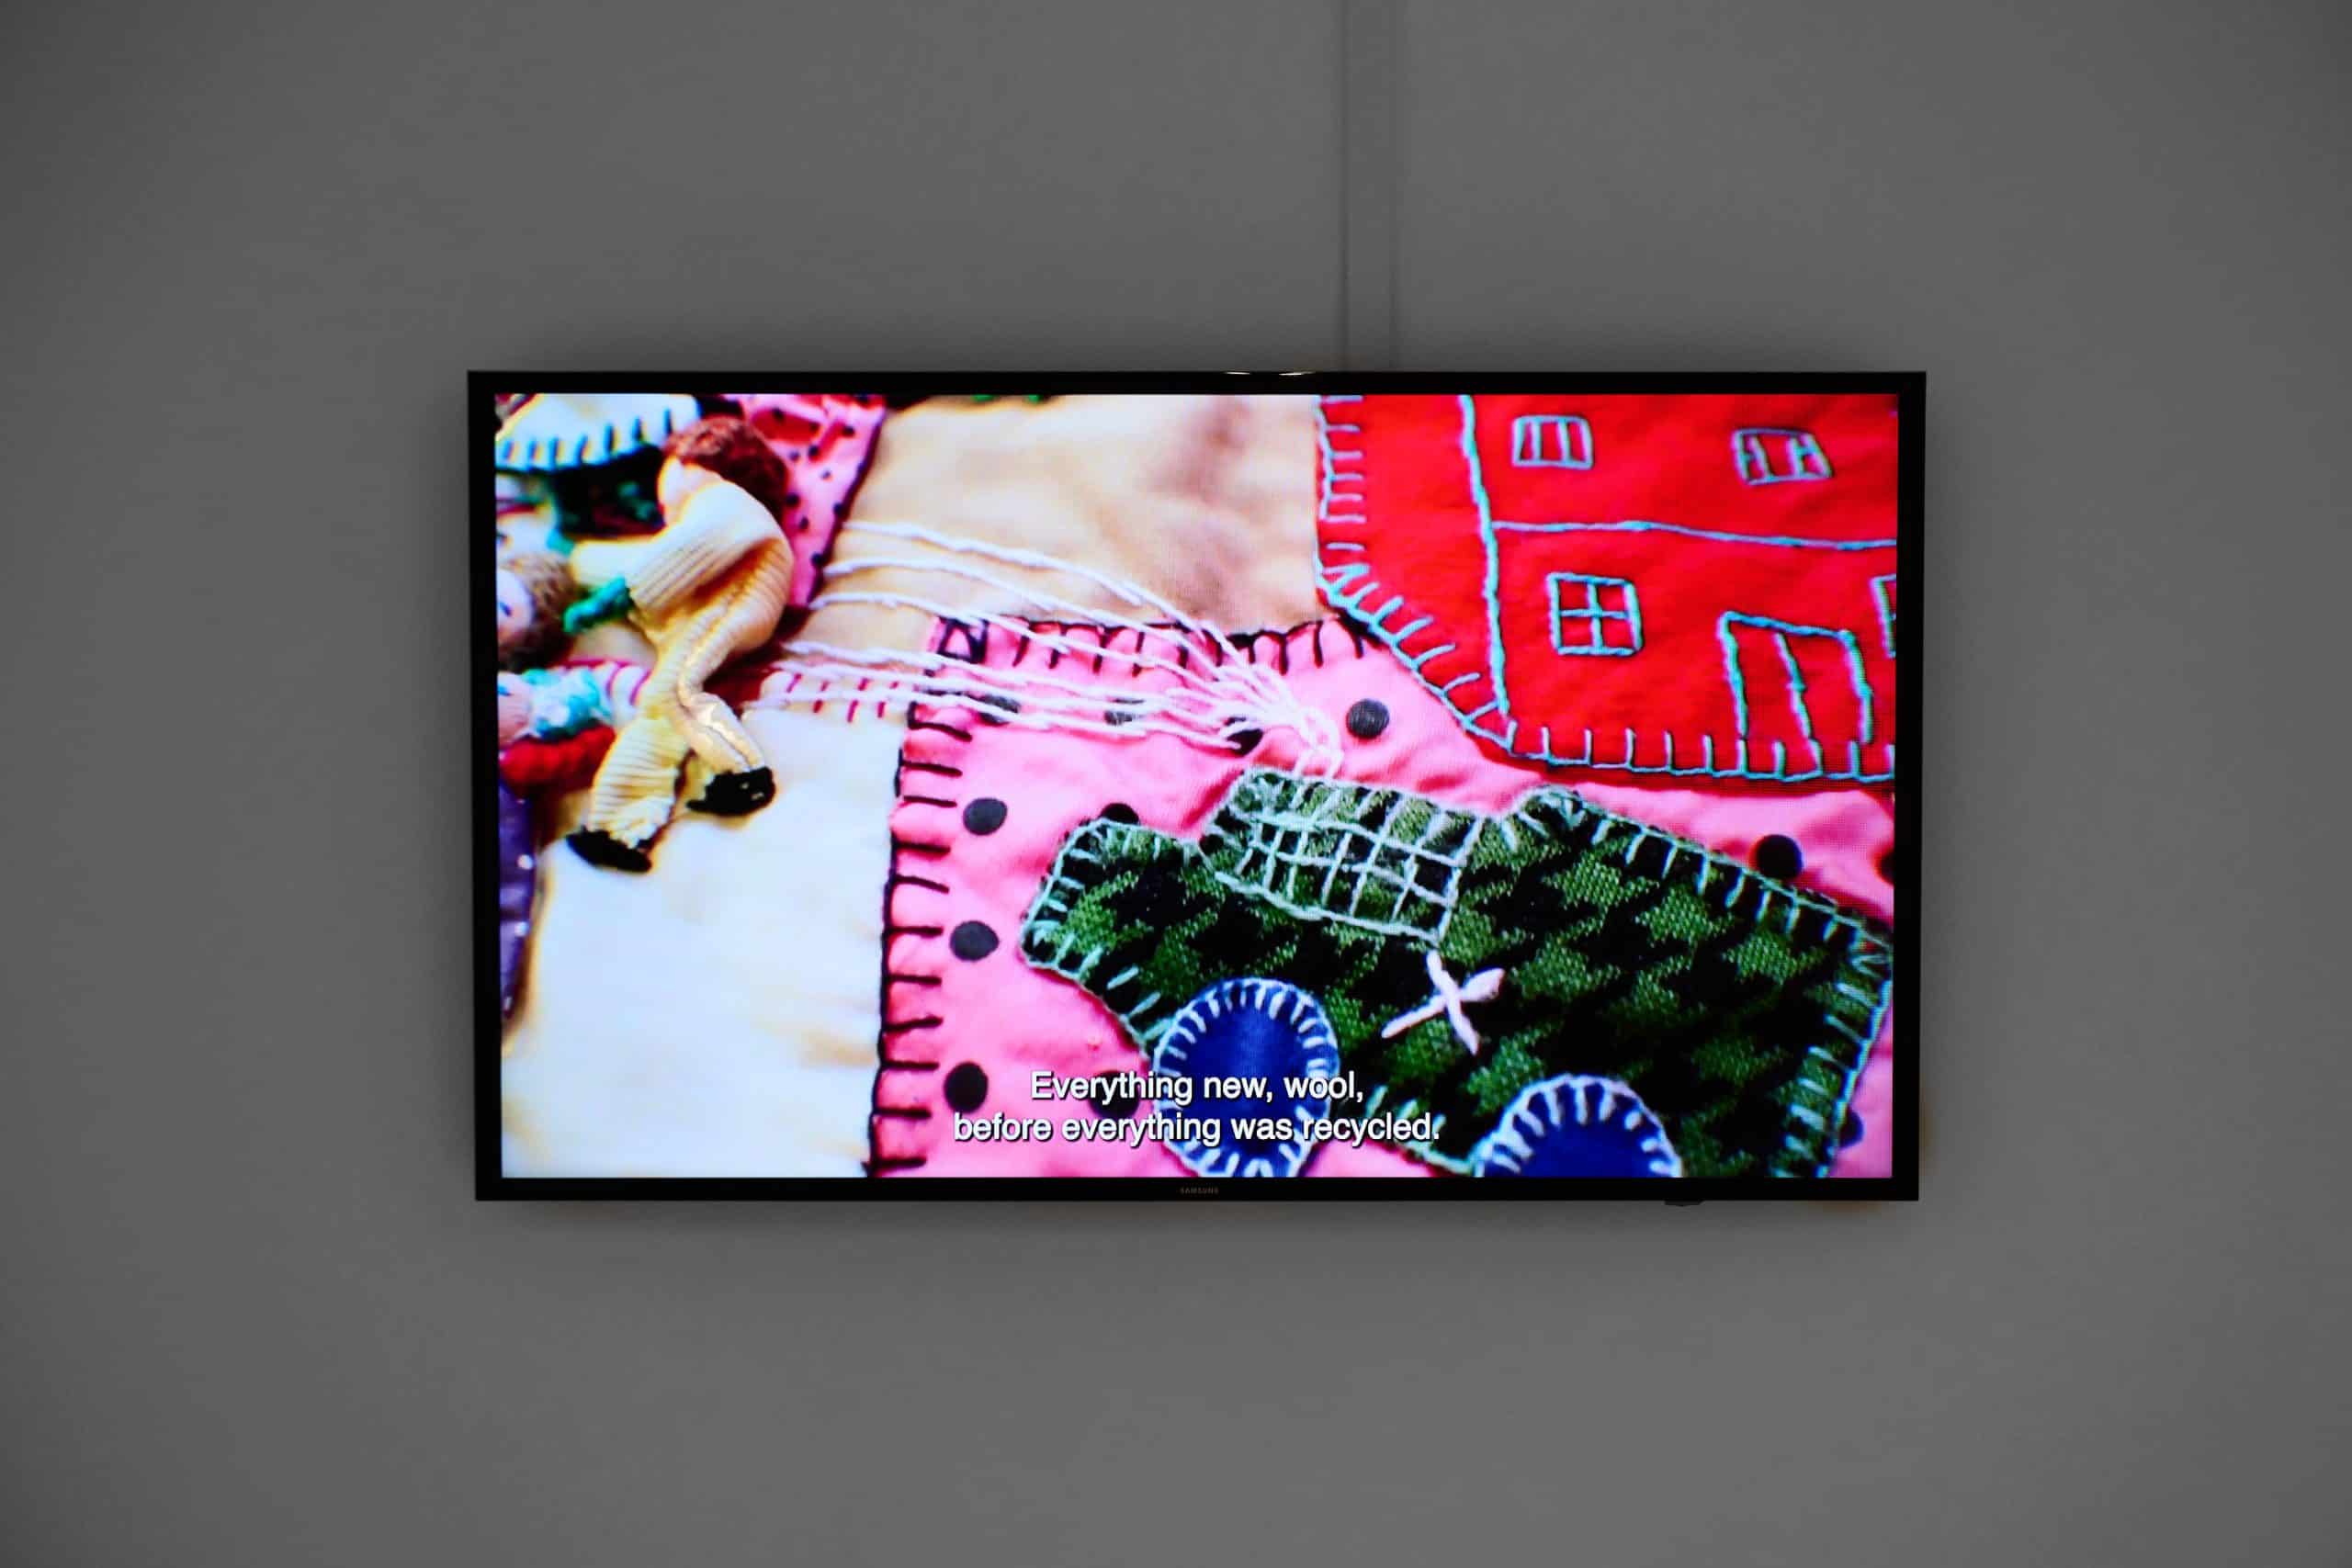 A TV screen hung on a white wall. On screen is a close up of bright pink, red and green patchwork fabrics and blanket stitching. Captions read “Everything new, wool, before everything was recycled.”